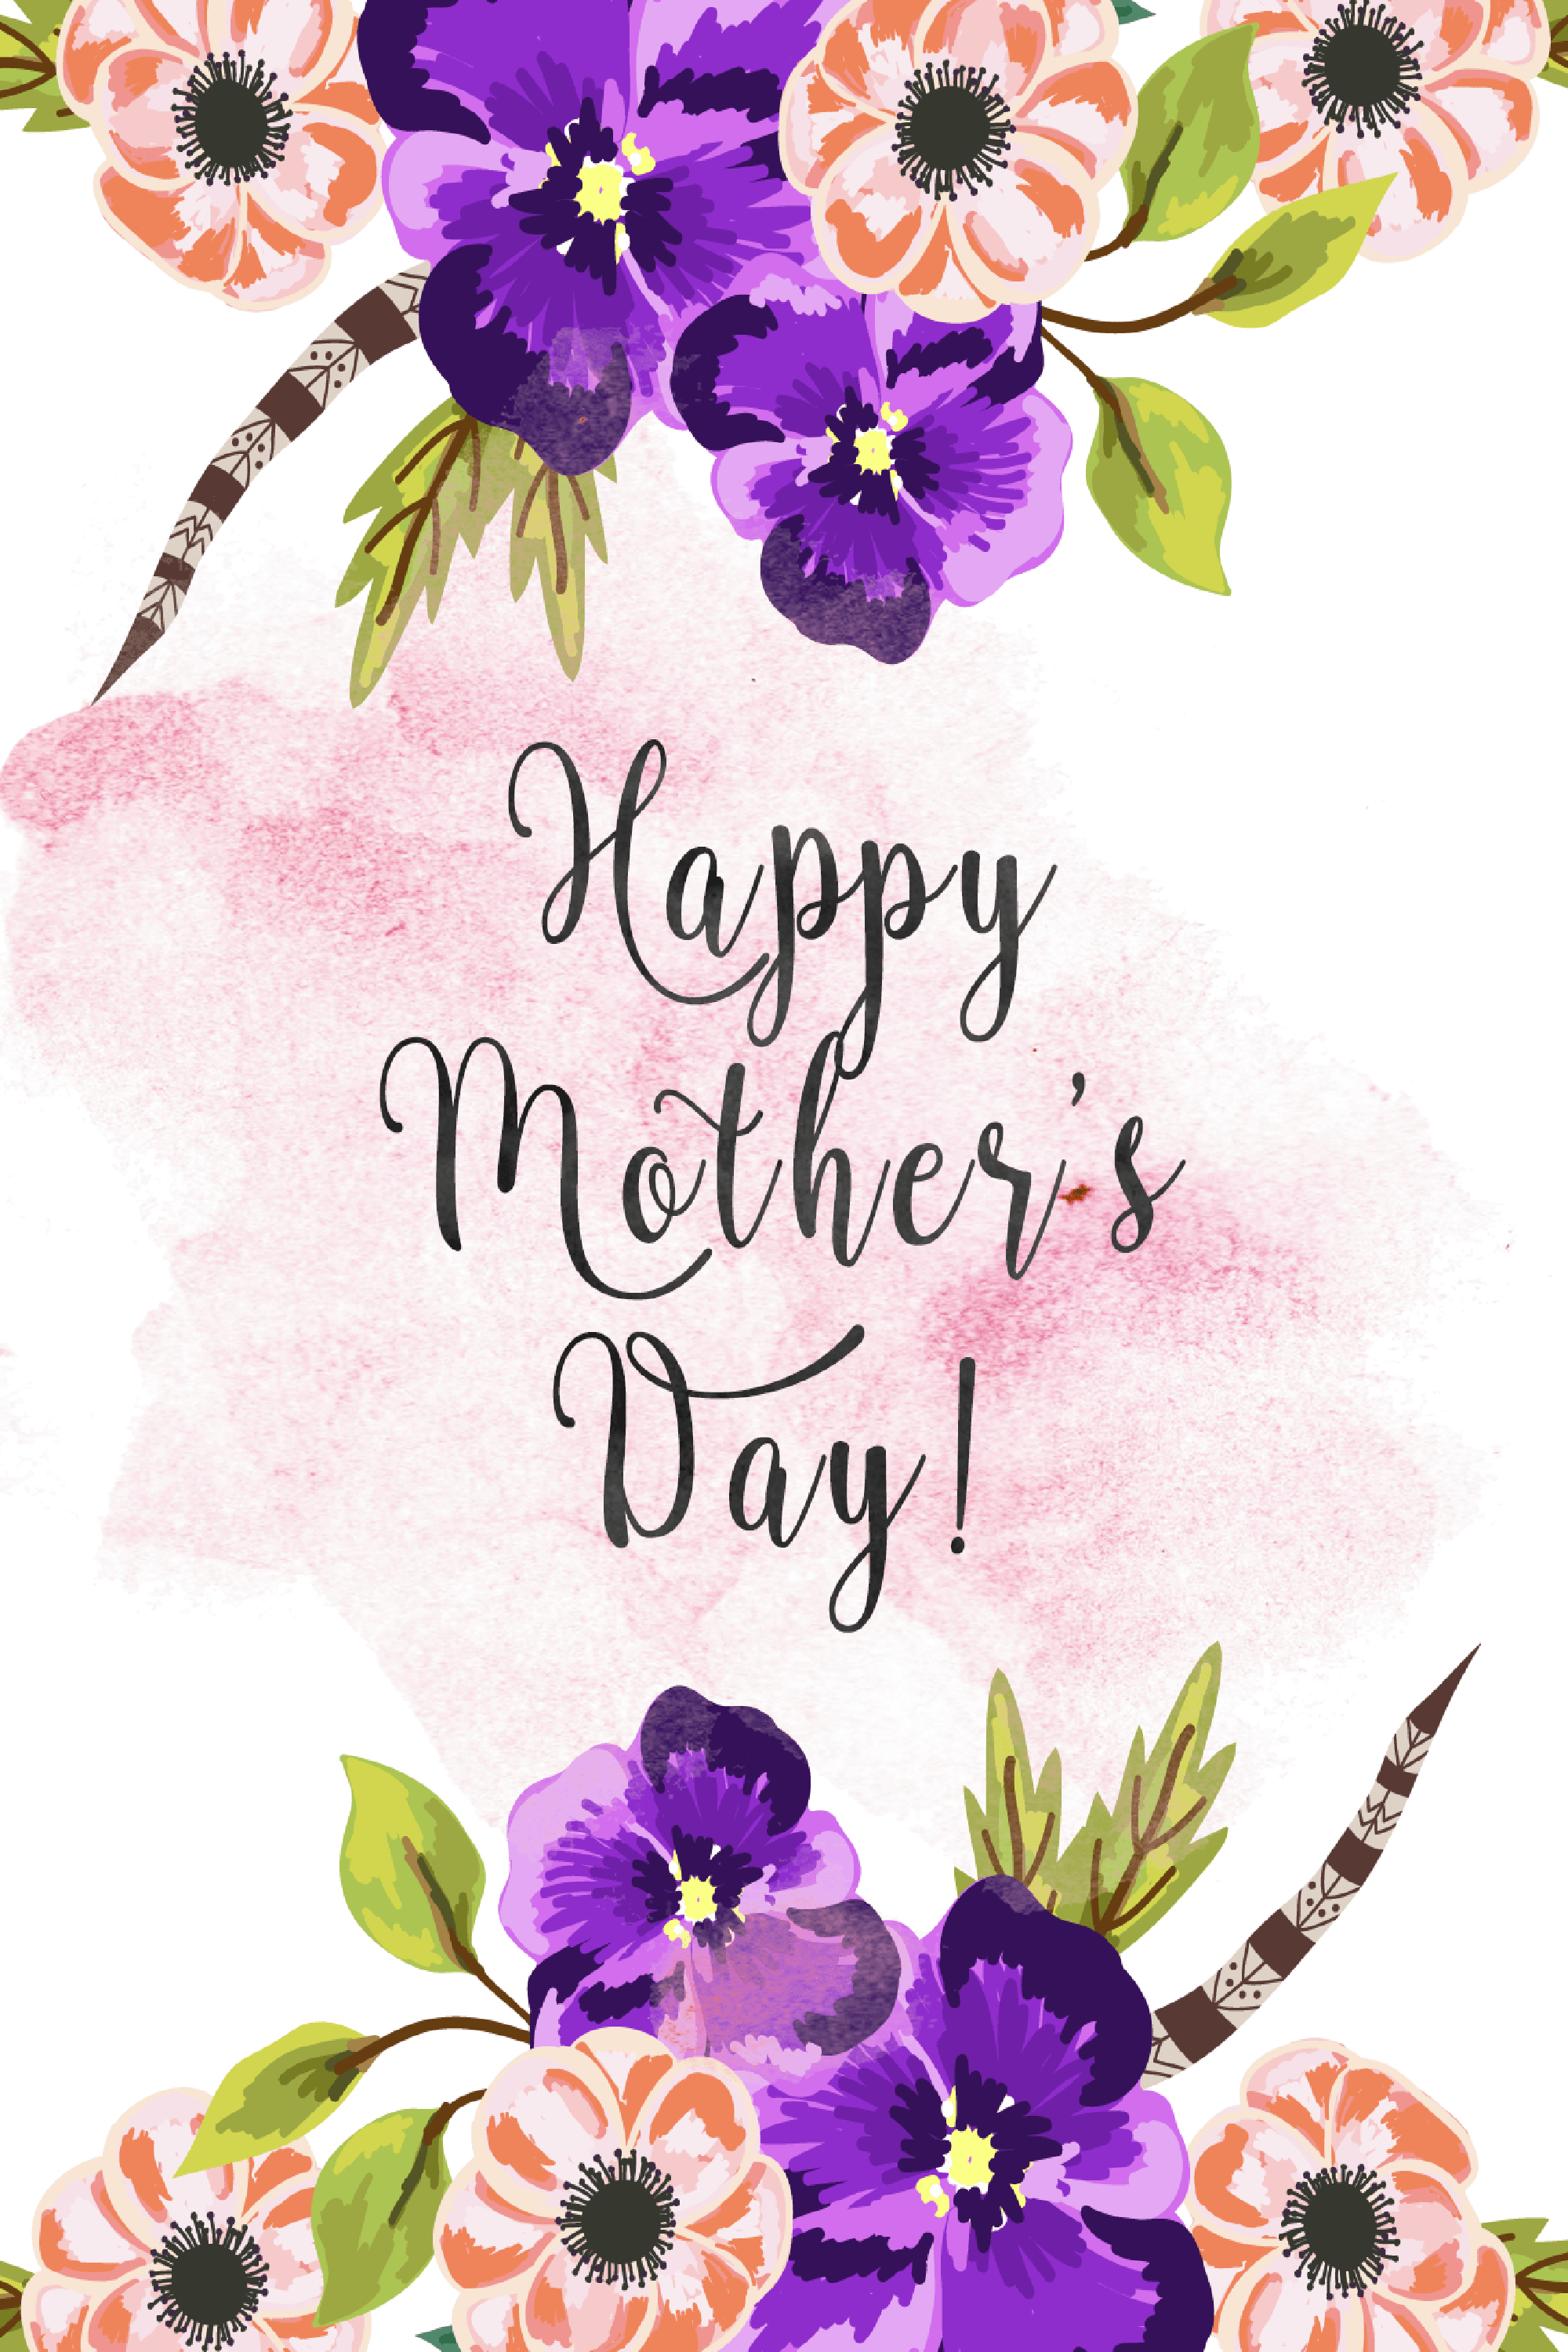 20 Cute Free Printable Mothers Day Cards - Mom Cards You Can Print - Make Mother Day Card Online Free Printable